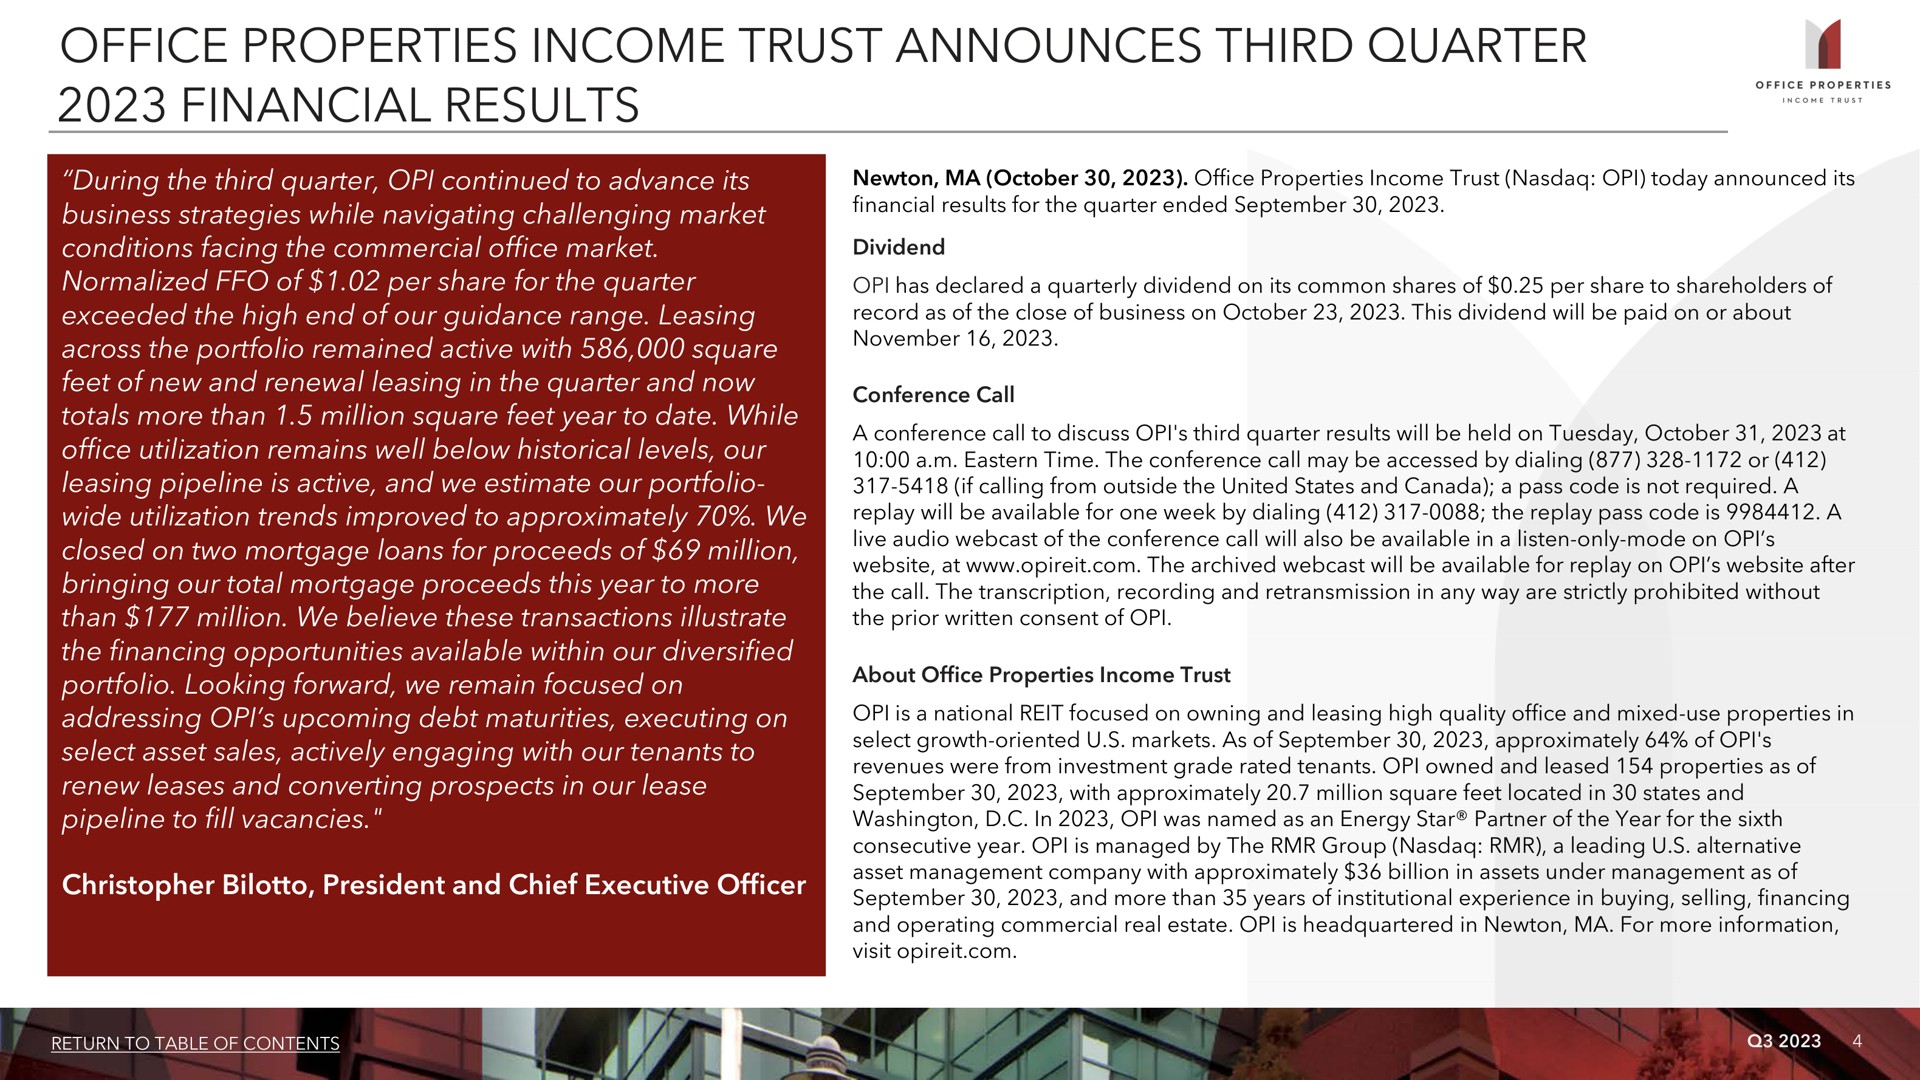 office properties income trust announces third quarter financial results i during the continued to advance its business strategies while navigating challenging market conditions facing the commercial market normalized of per share for the exceeded the high end of our guidance range leasing across the portfolio remained active with square feet of new and renewal leasing in the and now totals more than million square feet year to date while utilization remains well below historical levels our leasing pipeline is active and we estimate our portfolio wide utilization trends improved to approximately we closed on two mortgage loans for proceeds of million bringing our total mortgage proceeds this year to more than million we believe these transactions illustrate the financing opportunities available within our diversified portfolio looking forward we remain focused on addressing upcoming debt maturities executing on select asset sales actively engaging with our tenants to renew leases and converting prospects in our lease pipeline to fill vacancies president and chief executive officer | Office Properties Income Trust